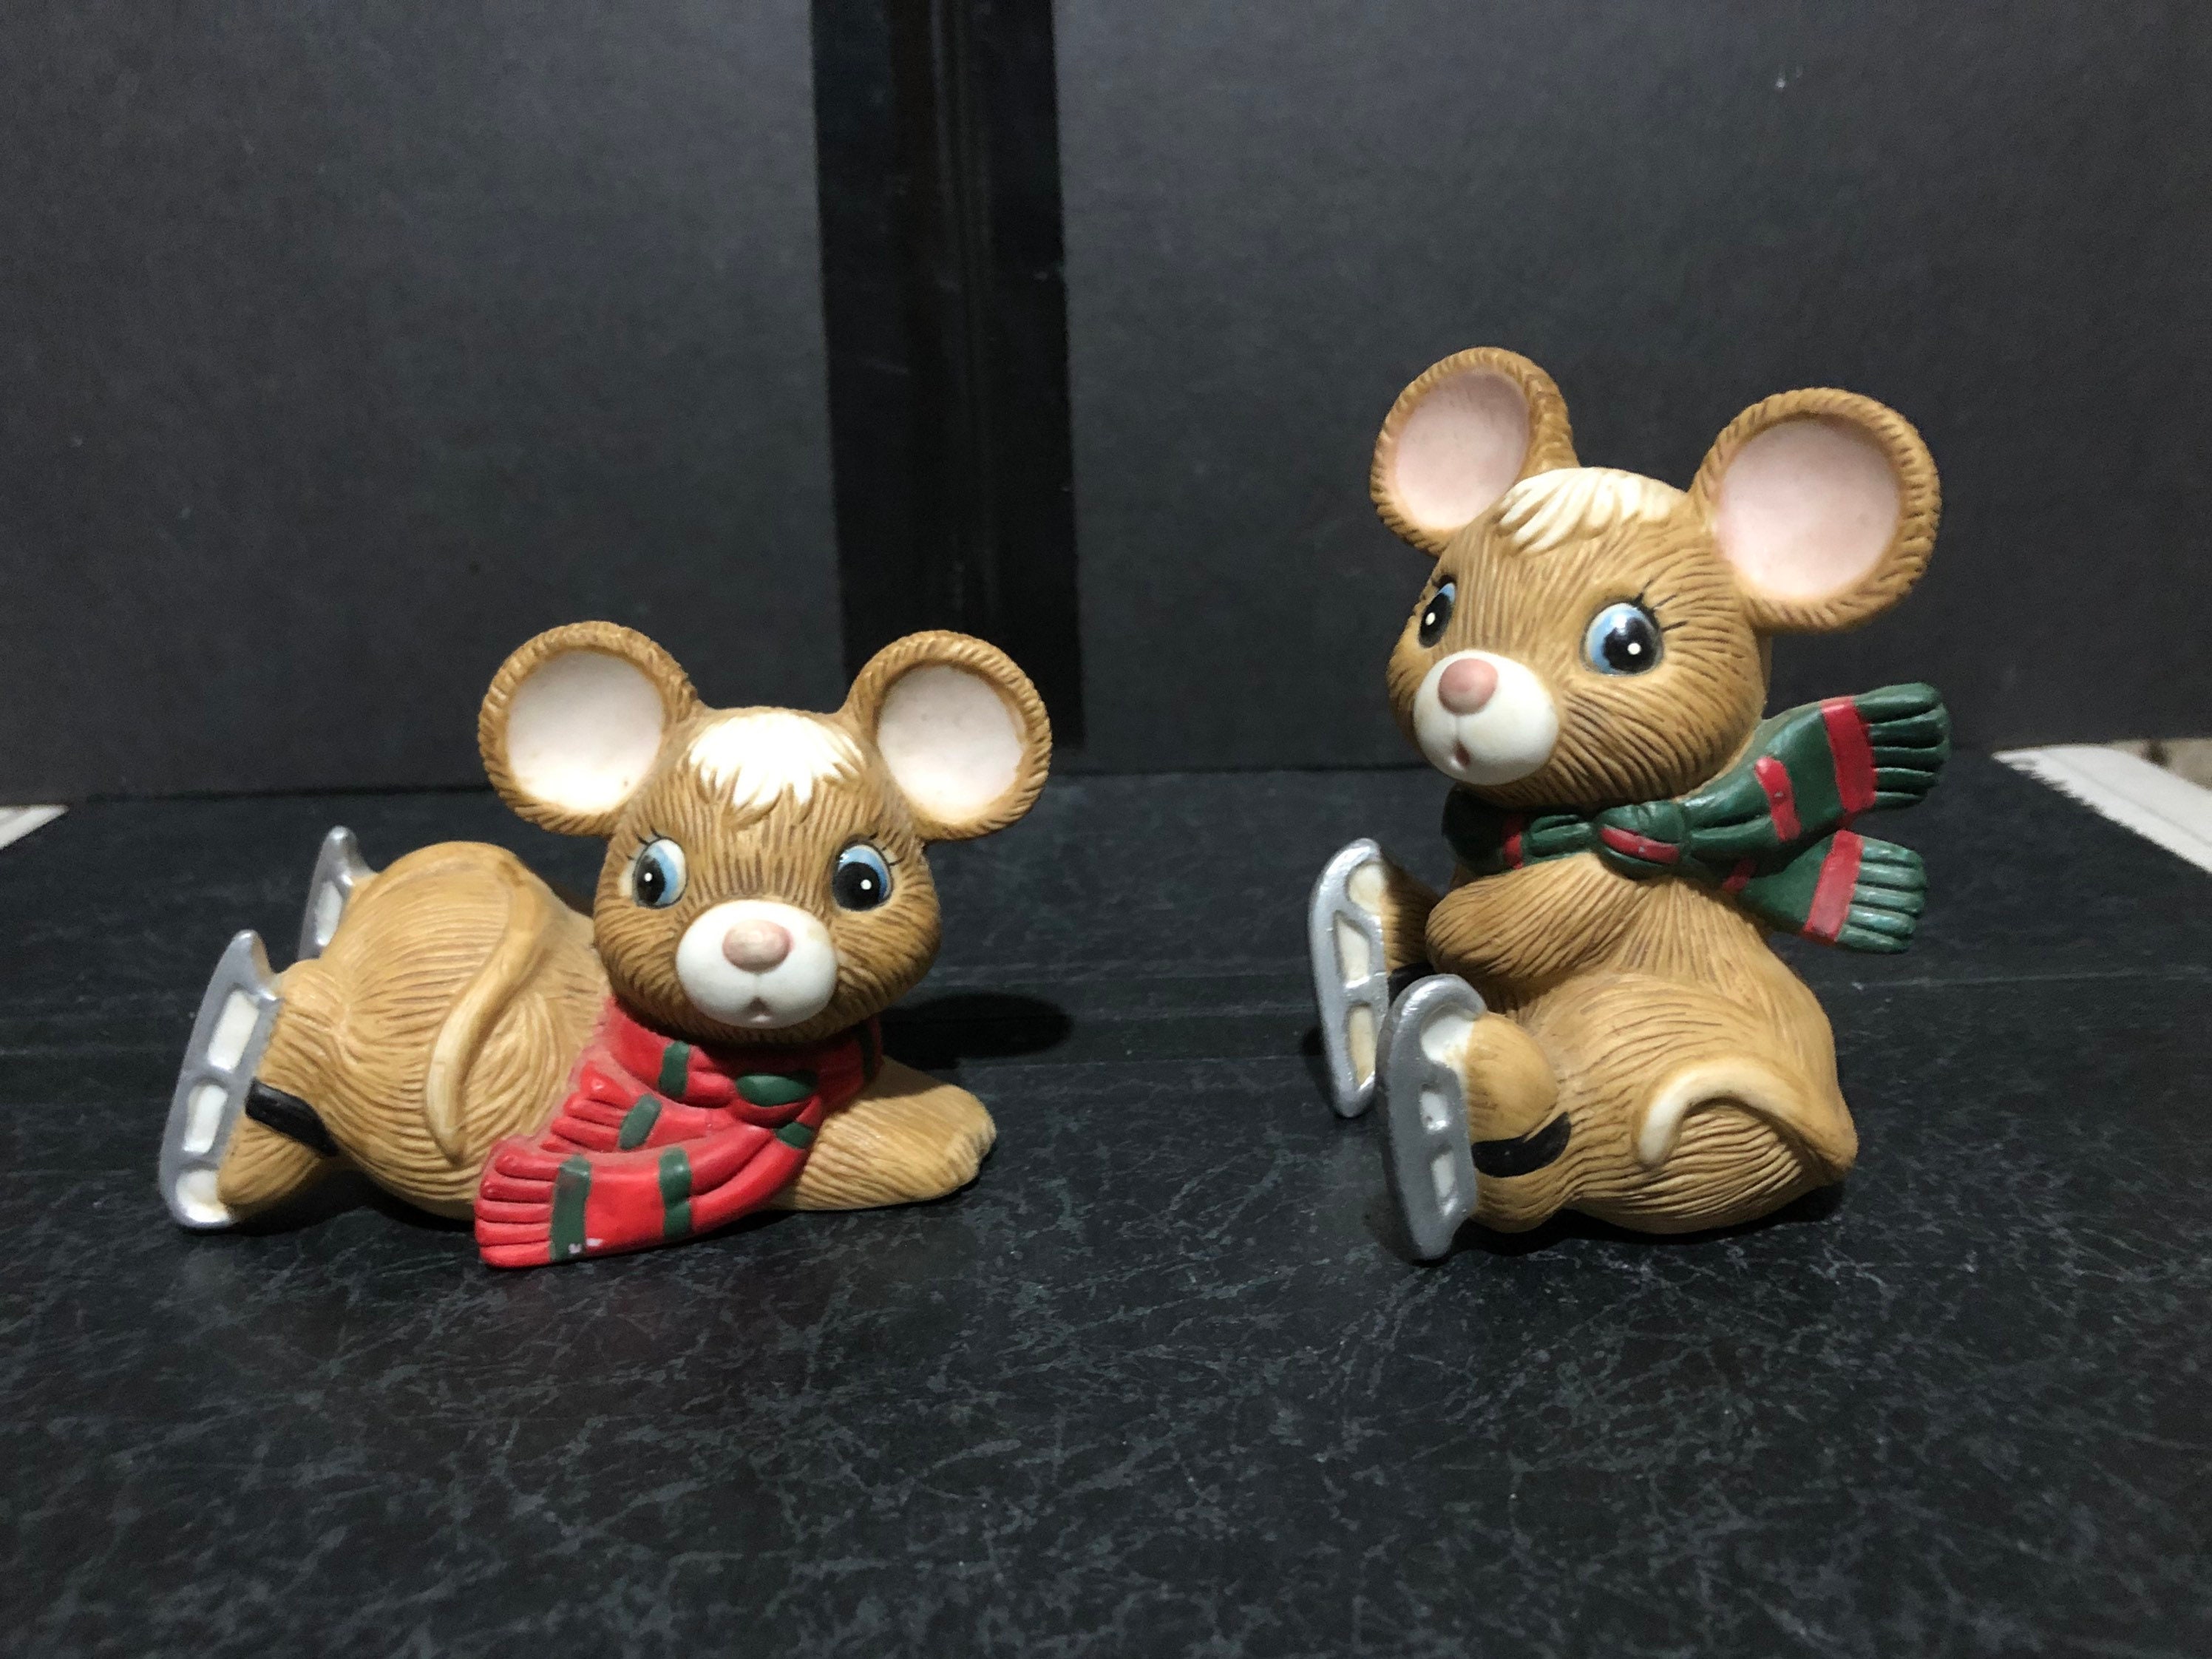 Set of 2 Figure Skating Mouse Figurines by Homco made in | Etsy